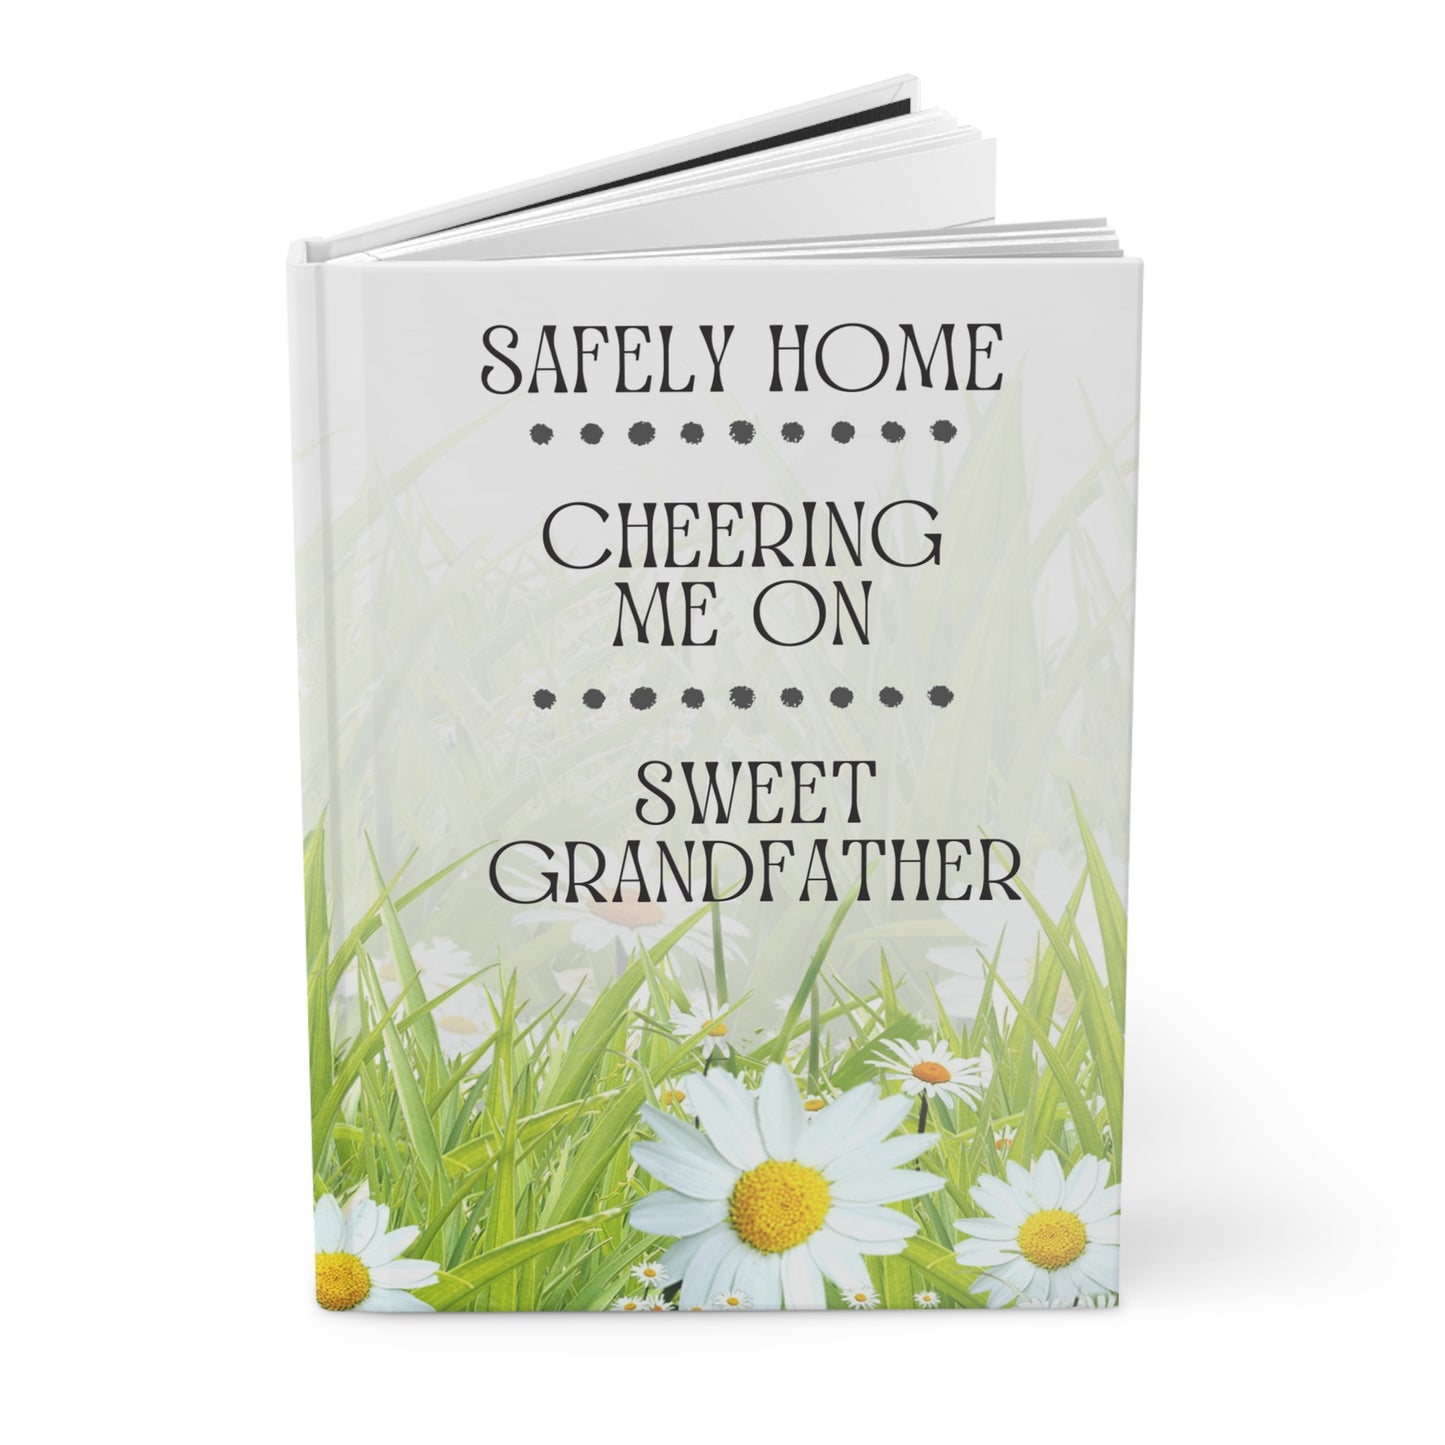 Grief Journal for Loss of Grandfather, Safely Home Cheering Me On